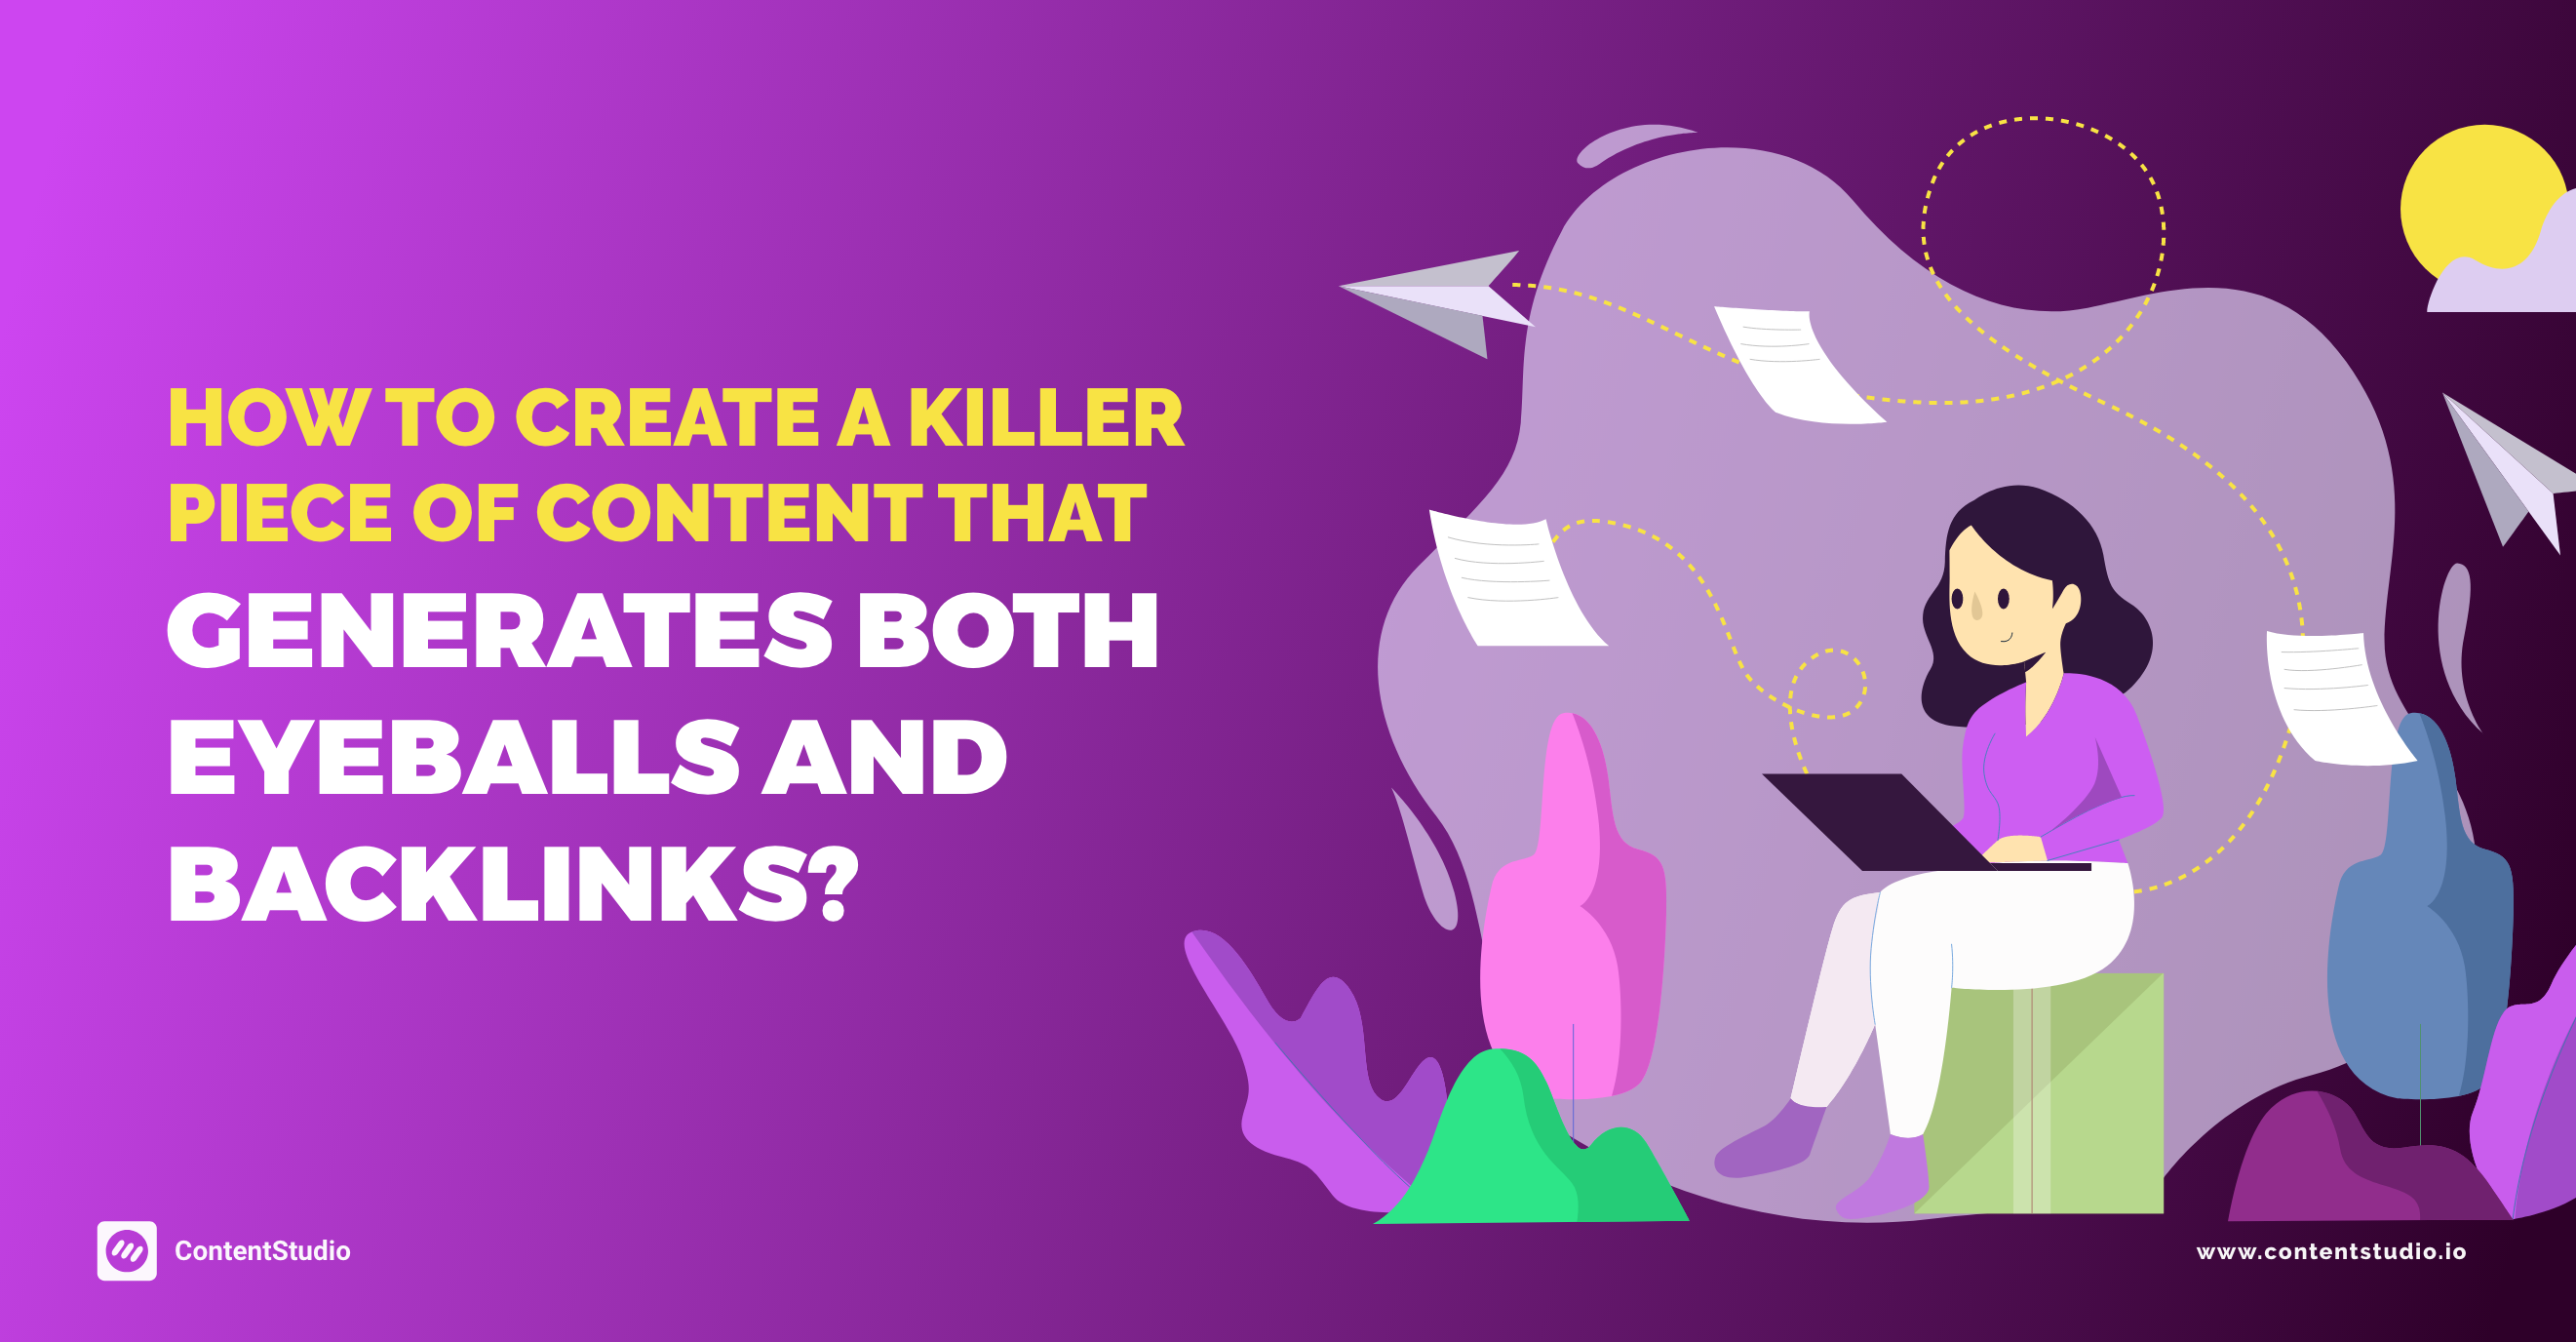 How to Create a Killer Piece of Content that Generates Both Eyeballs and Backlinks?